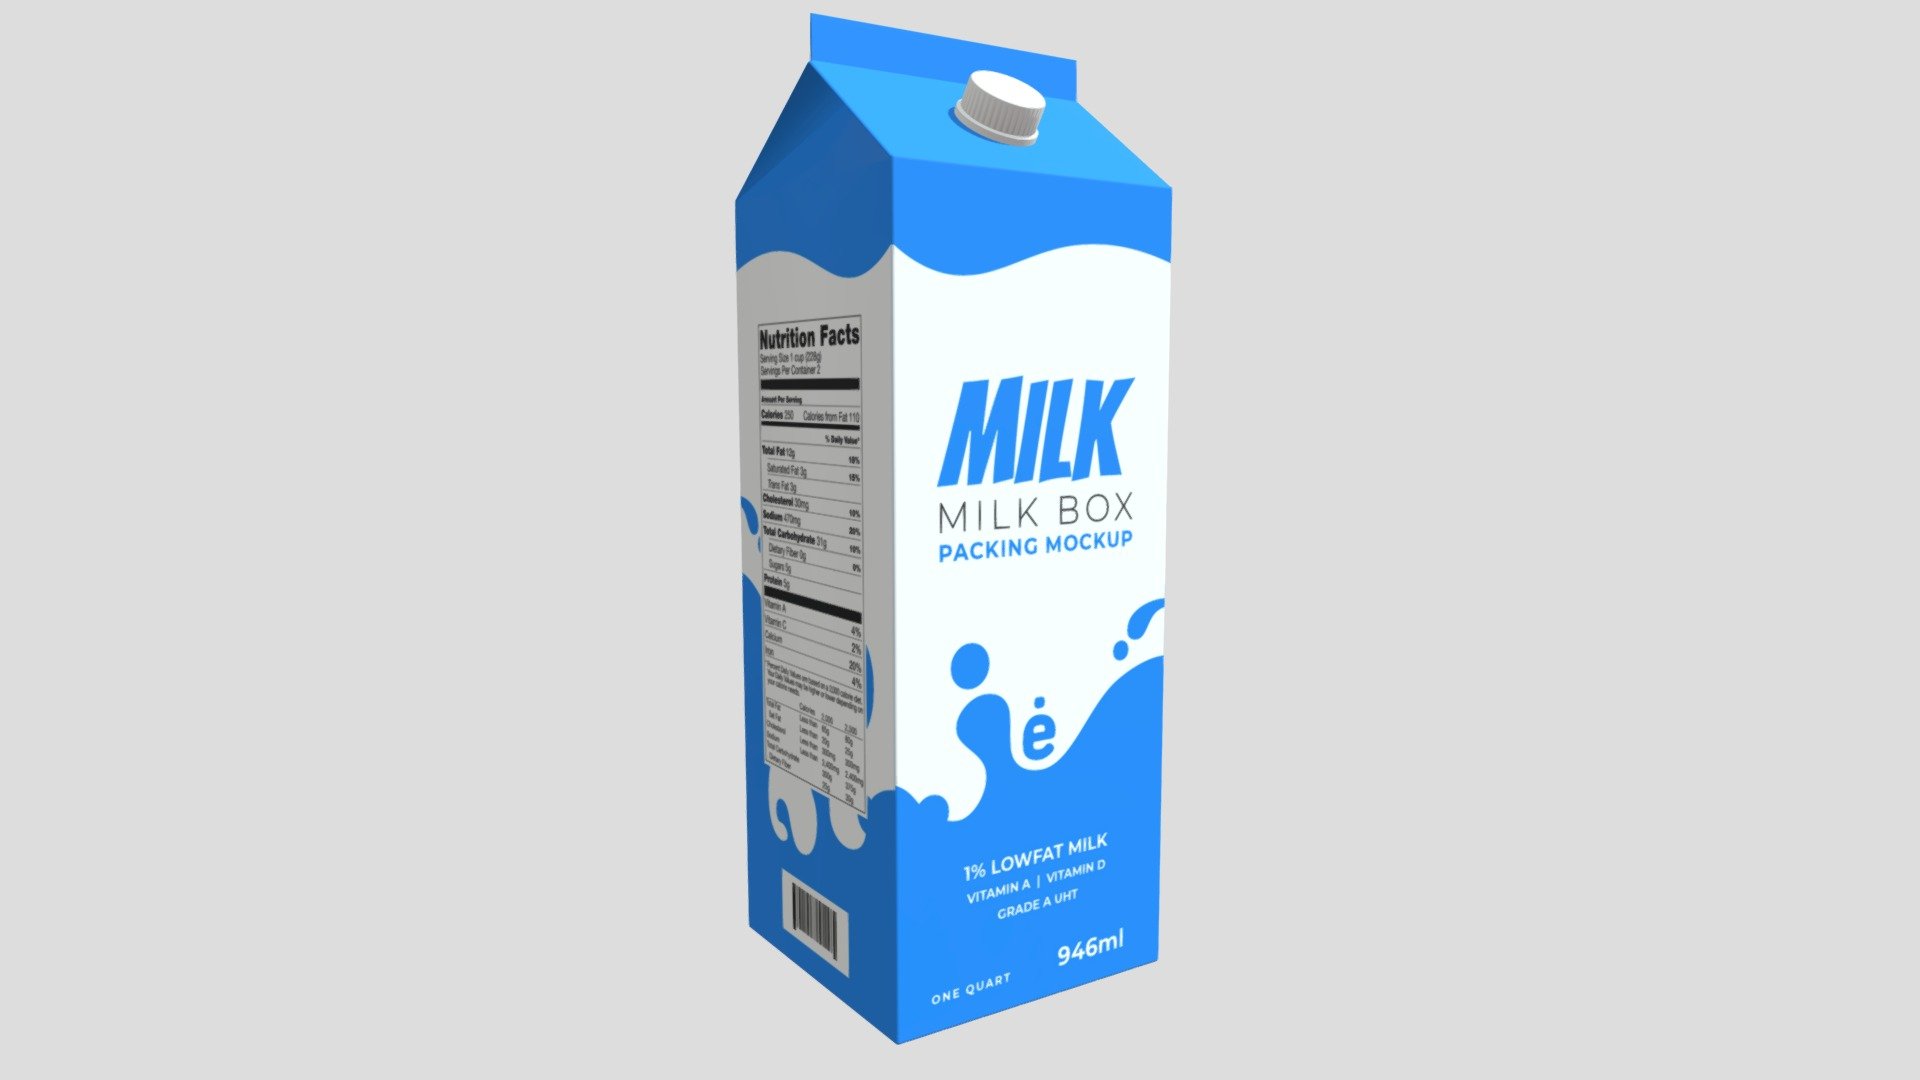 Milk carton 3D model is a high quality, photo real model that will enhance detail and realism to any of your game projects or commercials. The model has a fully textured, detailed design that allows for close-up renders 3d model